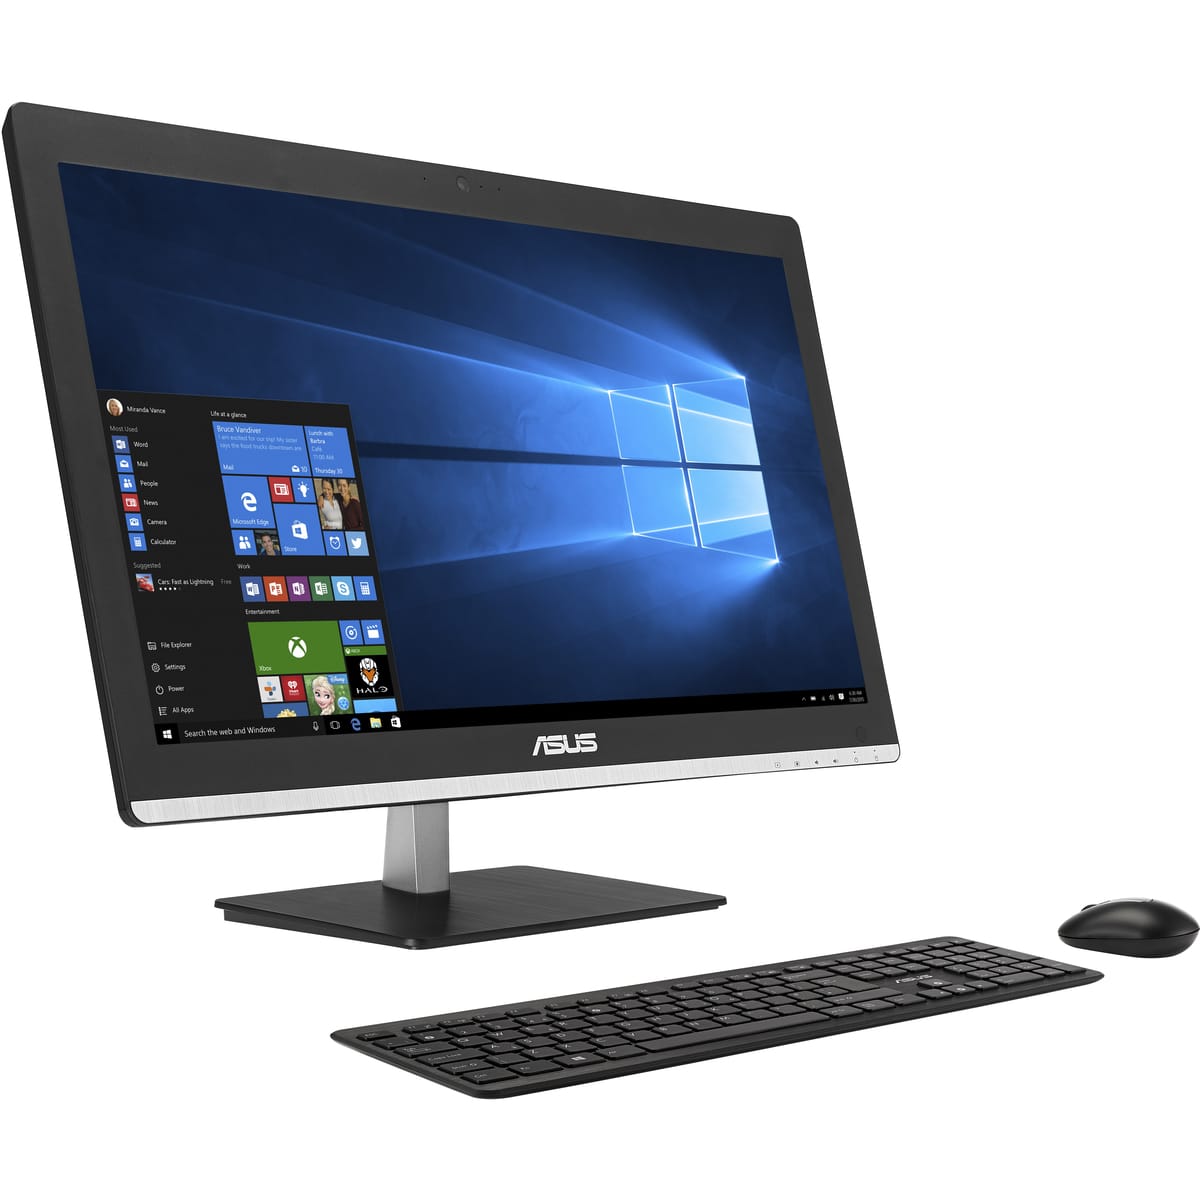 ASUS Ordinateur All in One V220IAGK-BA001X pas cher